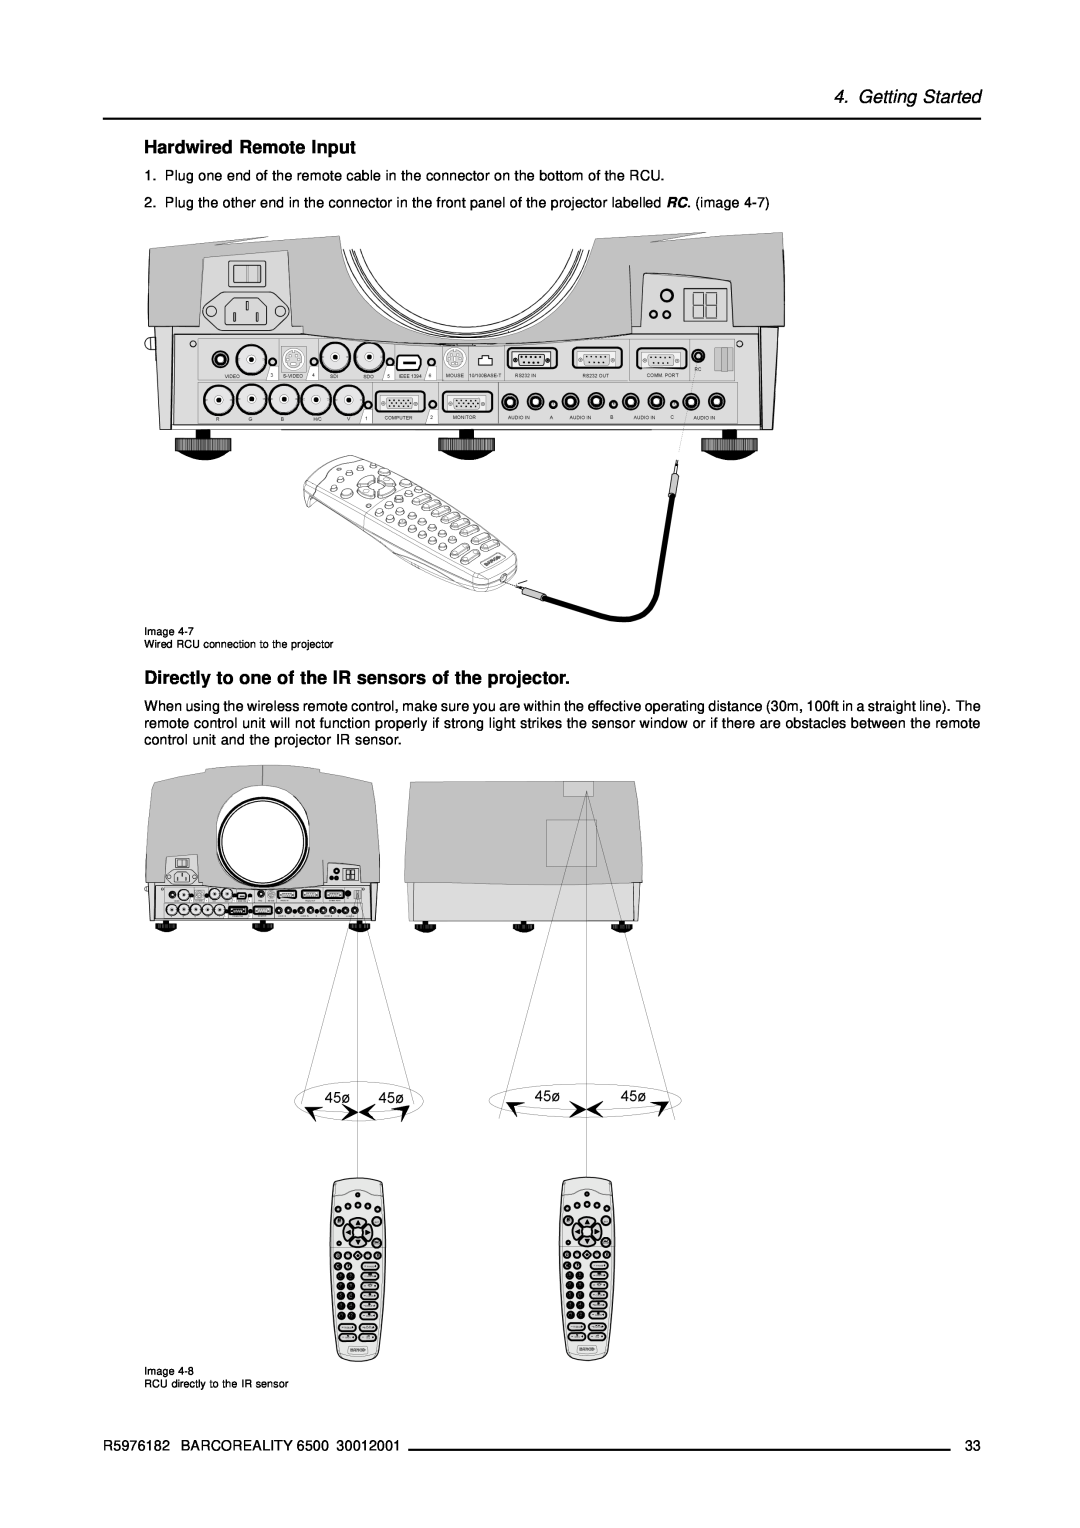 Barco R9001960 owner manual Hardwired Remote Input, Directly to one of the IR sensors of the projector, Getting Started 